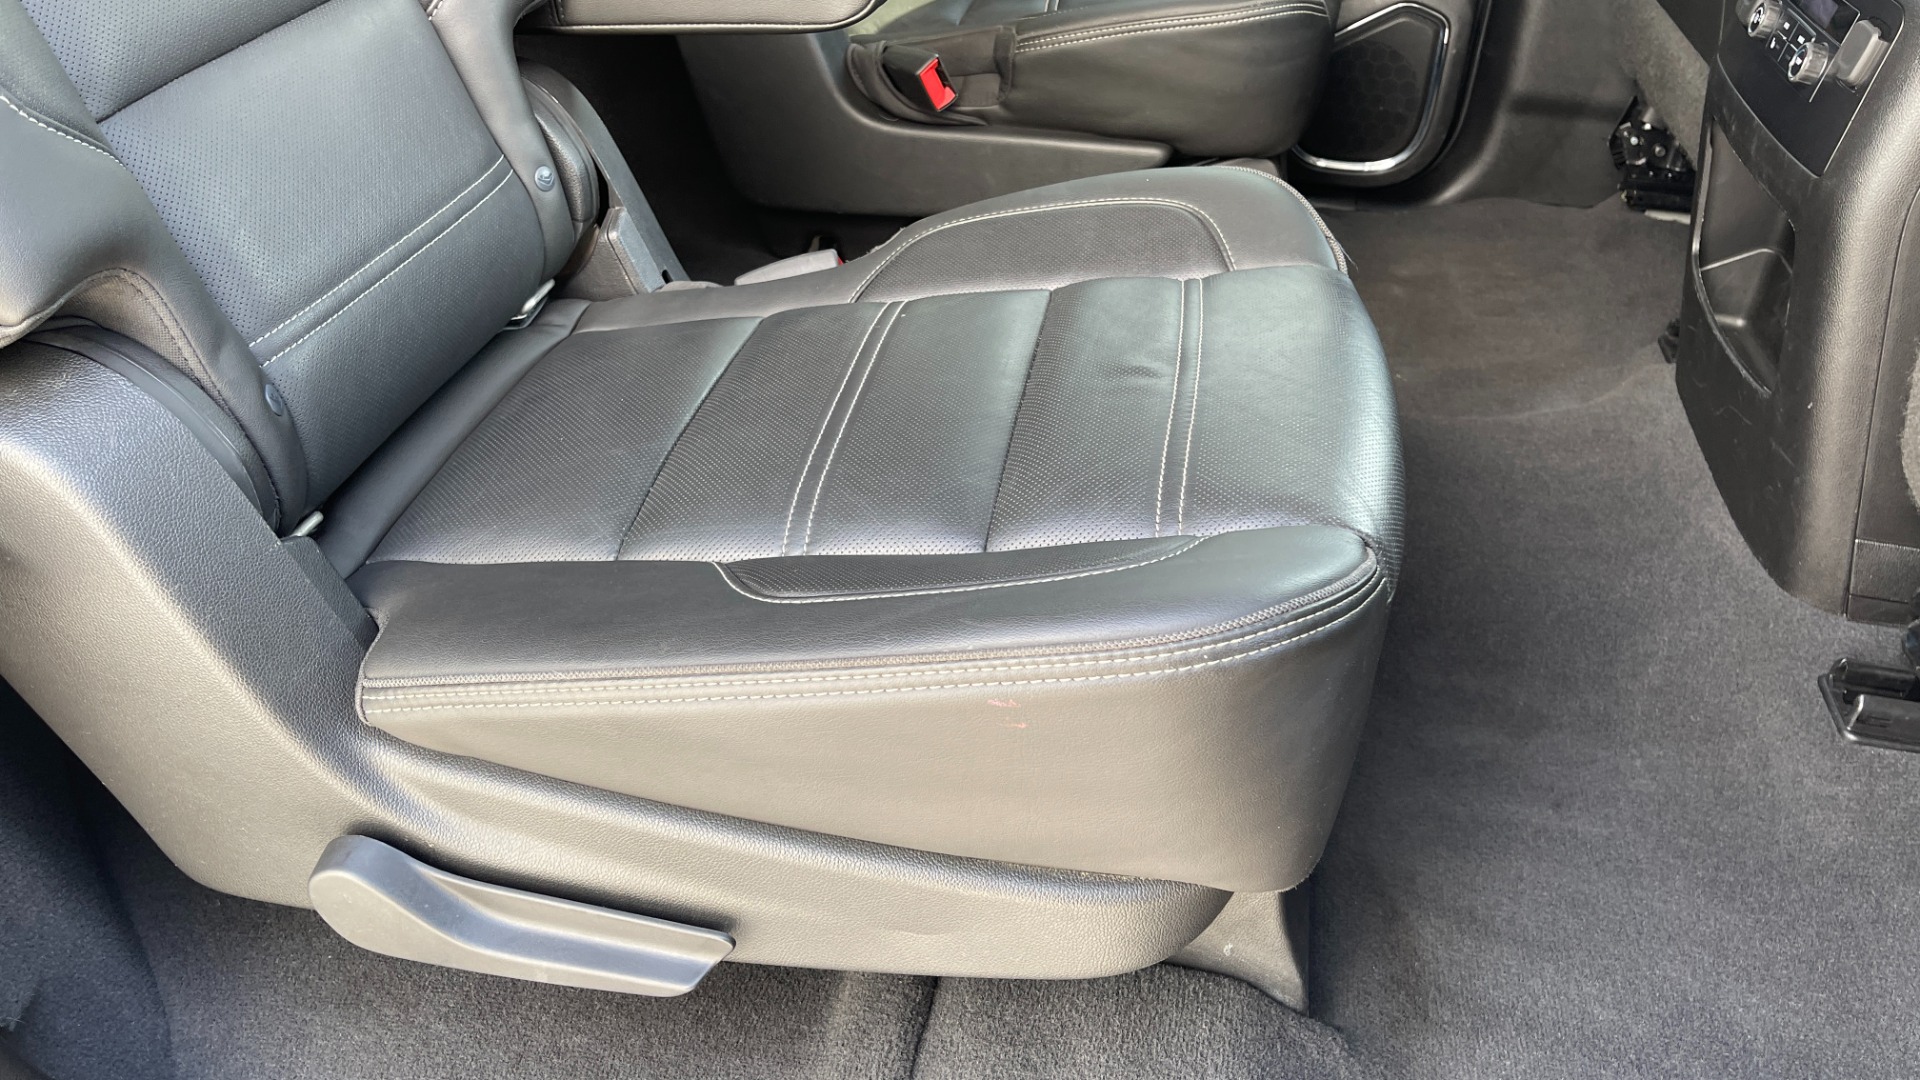 Used 2019 GMC Yukon XL DENALI / LEATHER / 4WD / CAPTAINS CHAIRS / 3 ROW SEATING for sale $55,000 at Formula Imports in Charlotte NC 28227 50